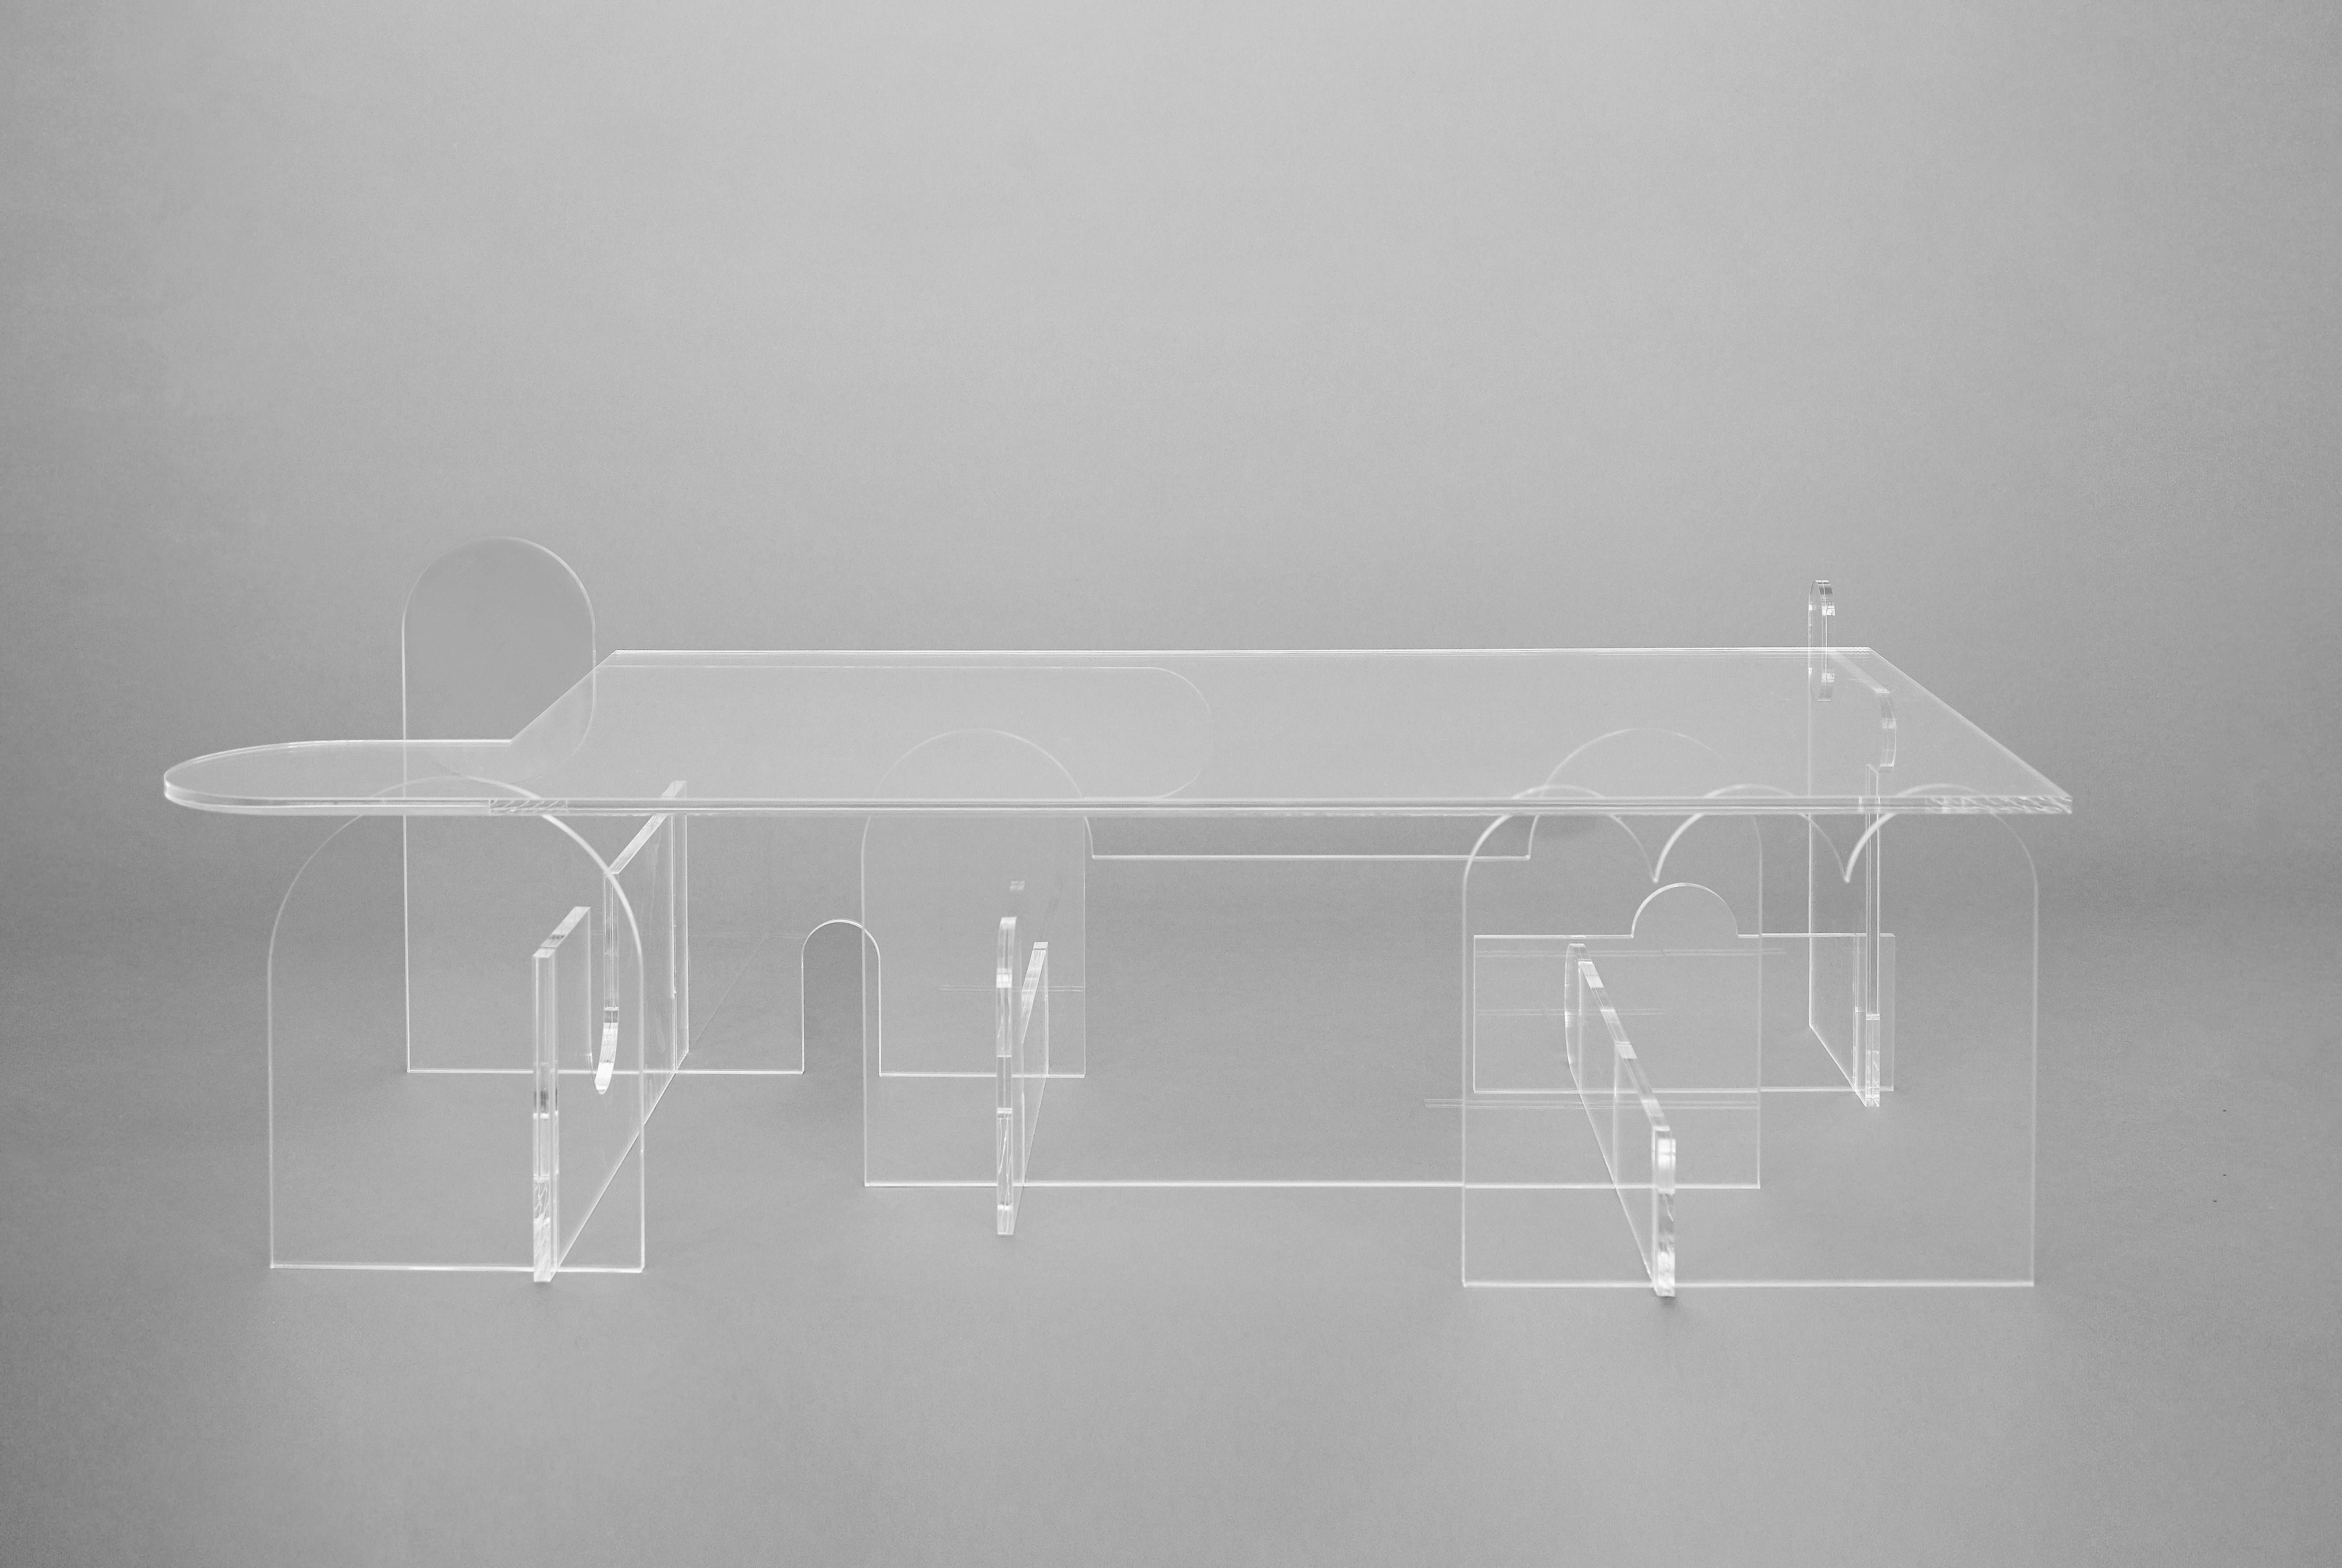 Invisible perspective table - Morgan Spaulding
Perspective table is a sculptural masterpiece that fuses light and
the lines of structure in a perfect blend.
EO Editions
Dimensions: L 100 x W 51x H 31 cm
Material: Clear acrylic.

Morgan